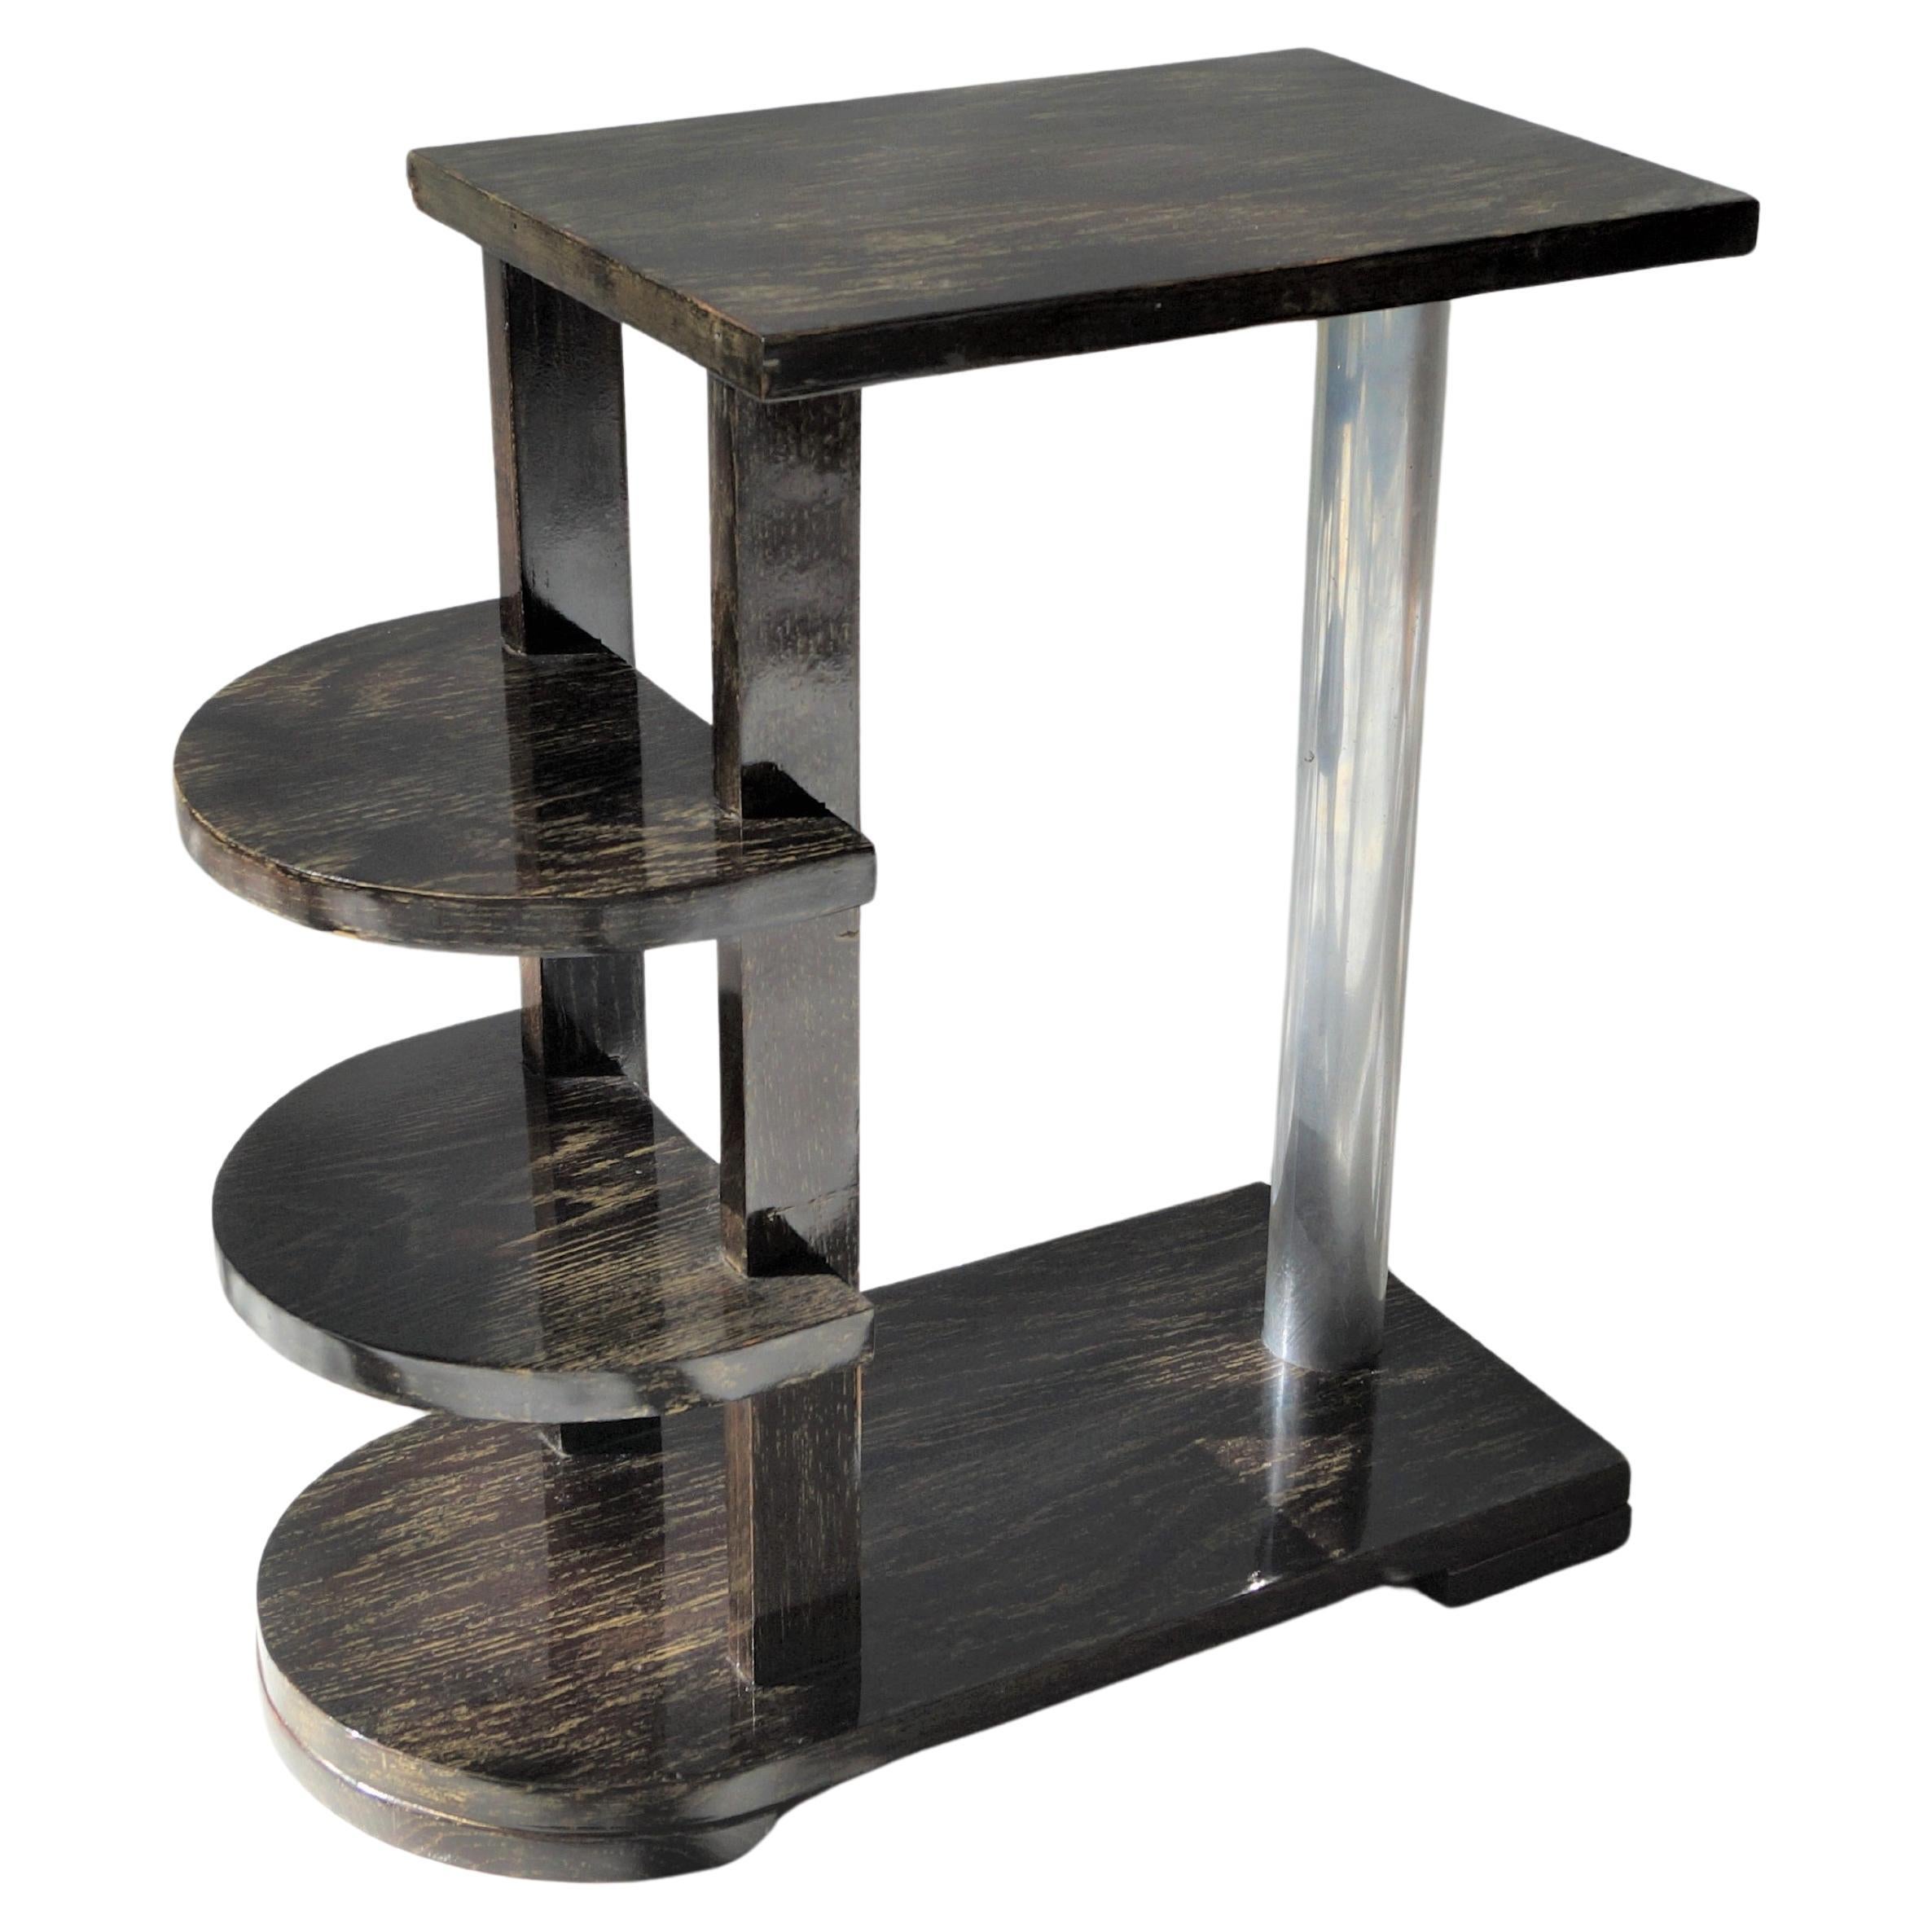 French Art Deco modernist sidetable by Michel Dufet, 1930s